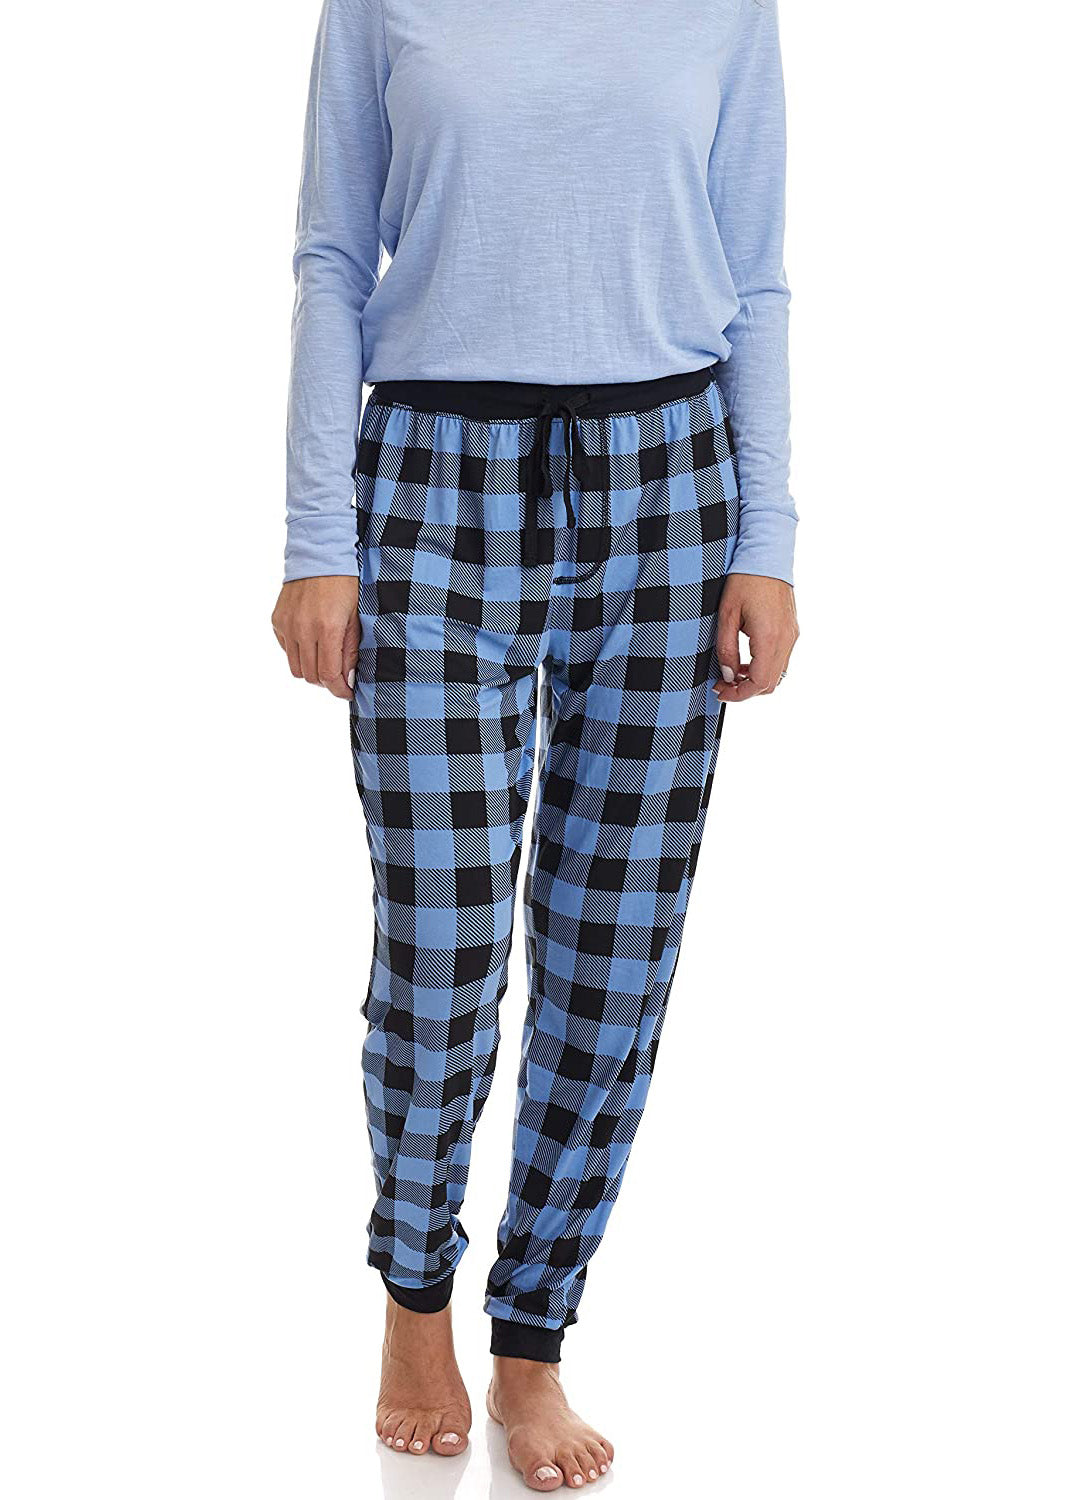 PJ joggers with soft velvety texture, stretch, elastic waistband, drawstring, and stylish ankle cuff. This pattern is plaid black and blue.